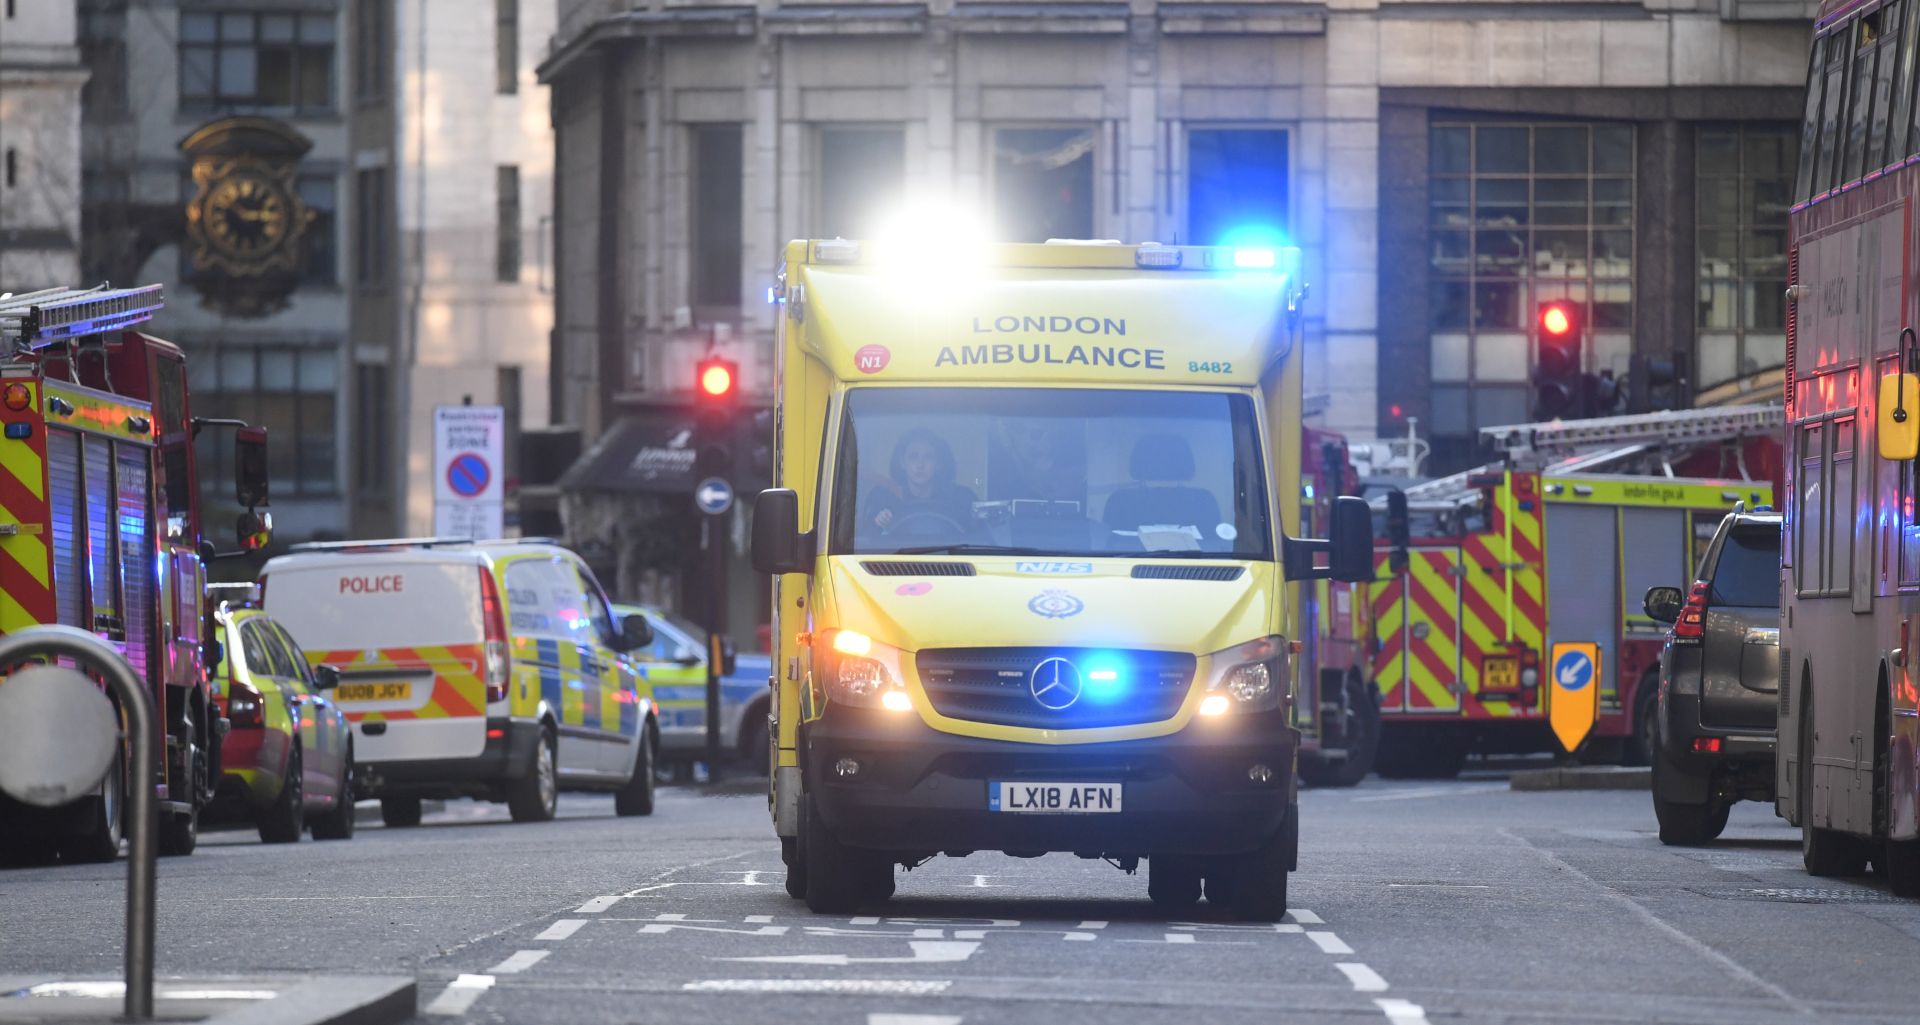 epa08033218 Medical services at the scene of an incident at London Bridge in London, Britain, 29 November 2019. According to reports, a man has been detained after police officers were called to a stabbing at London Bridge. Several people have been injured.  EPA/FACUNDO ARRIZABALAGA